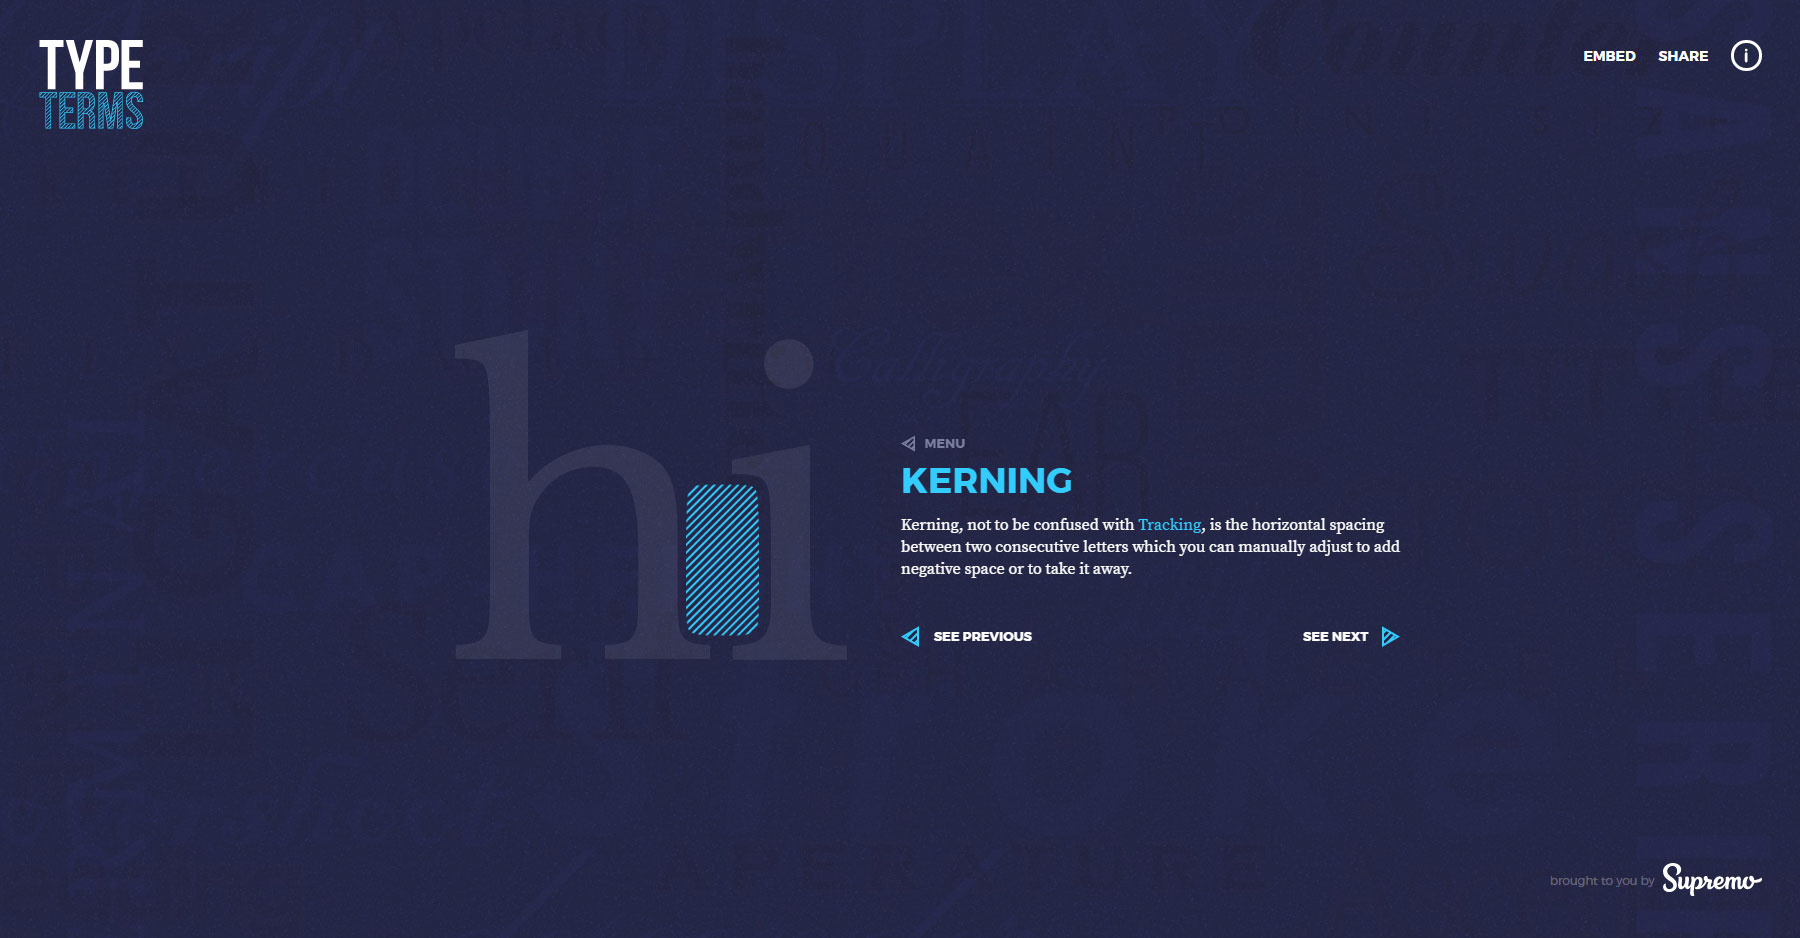 Type Terms - Website of the Day